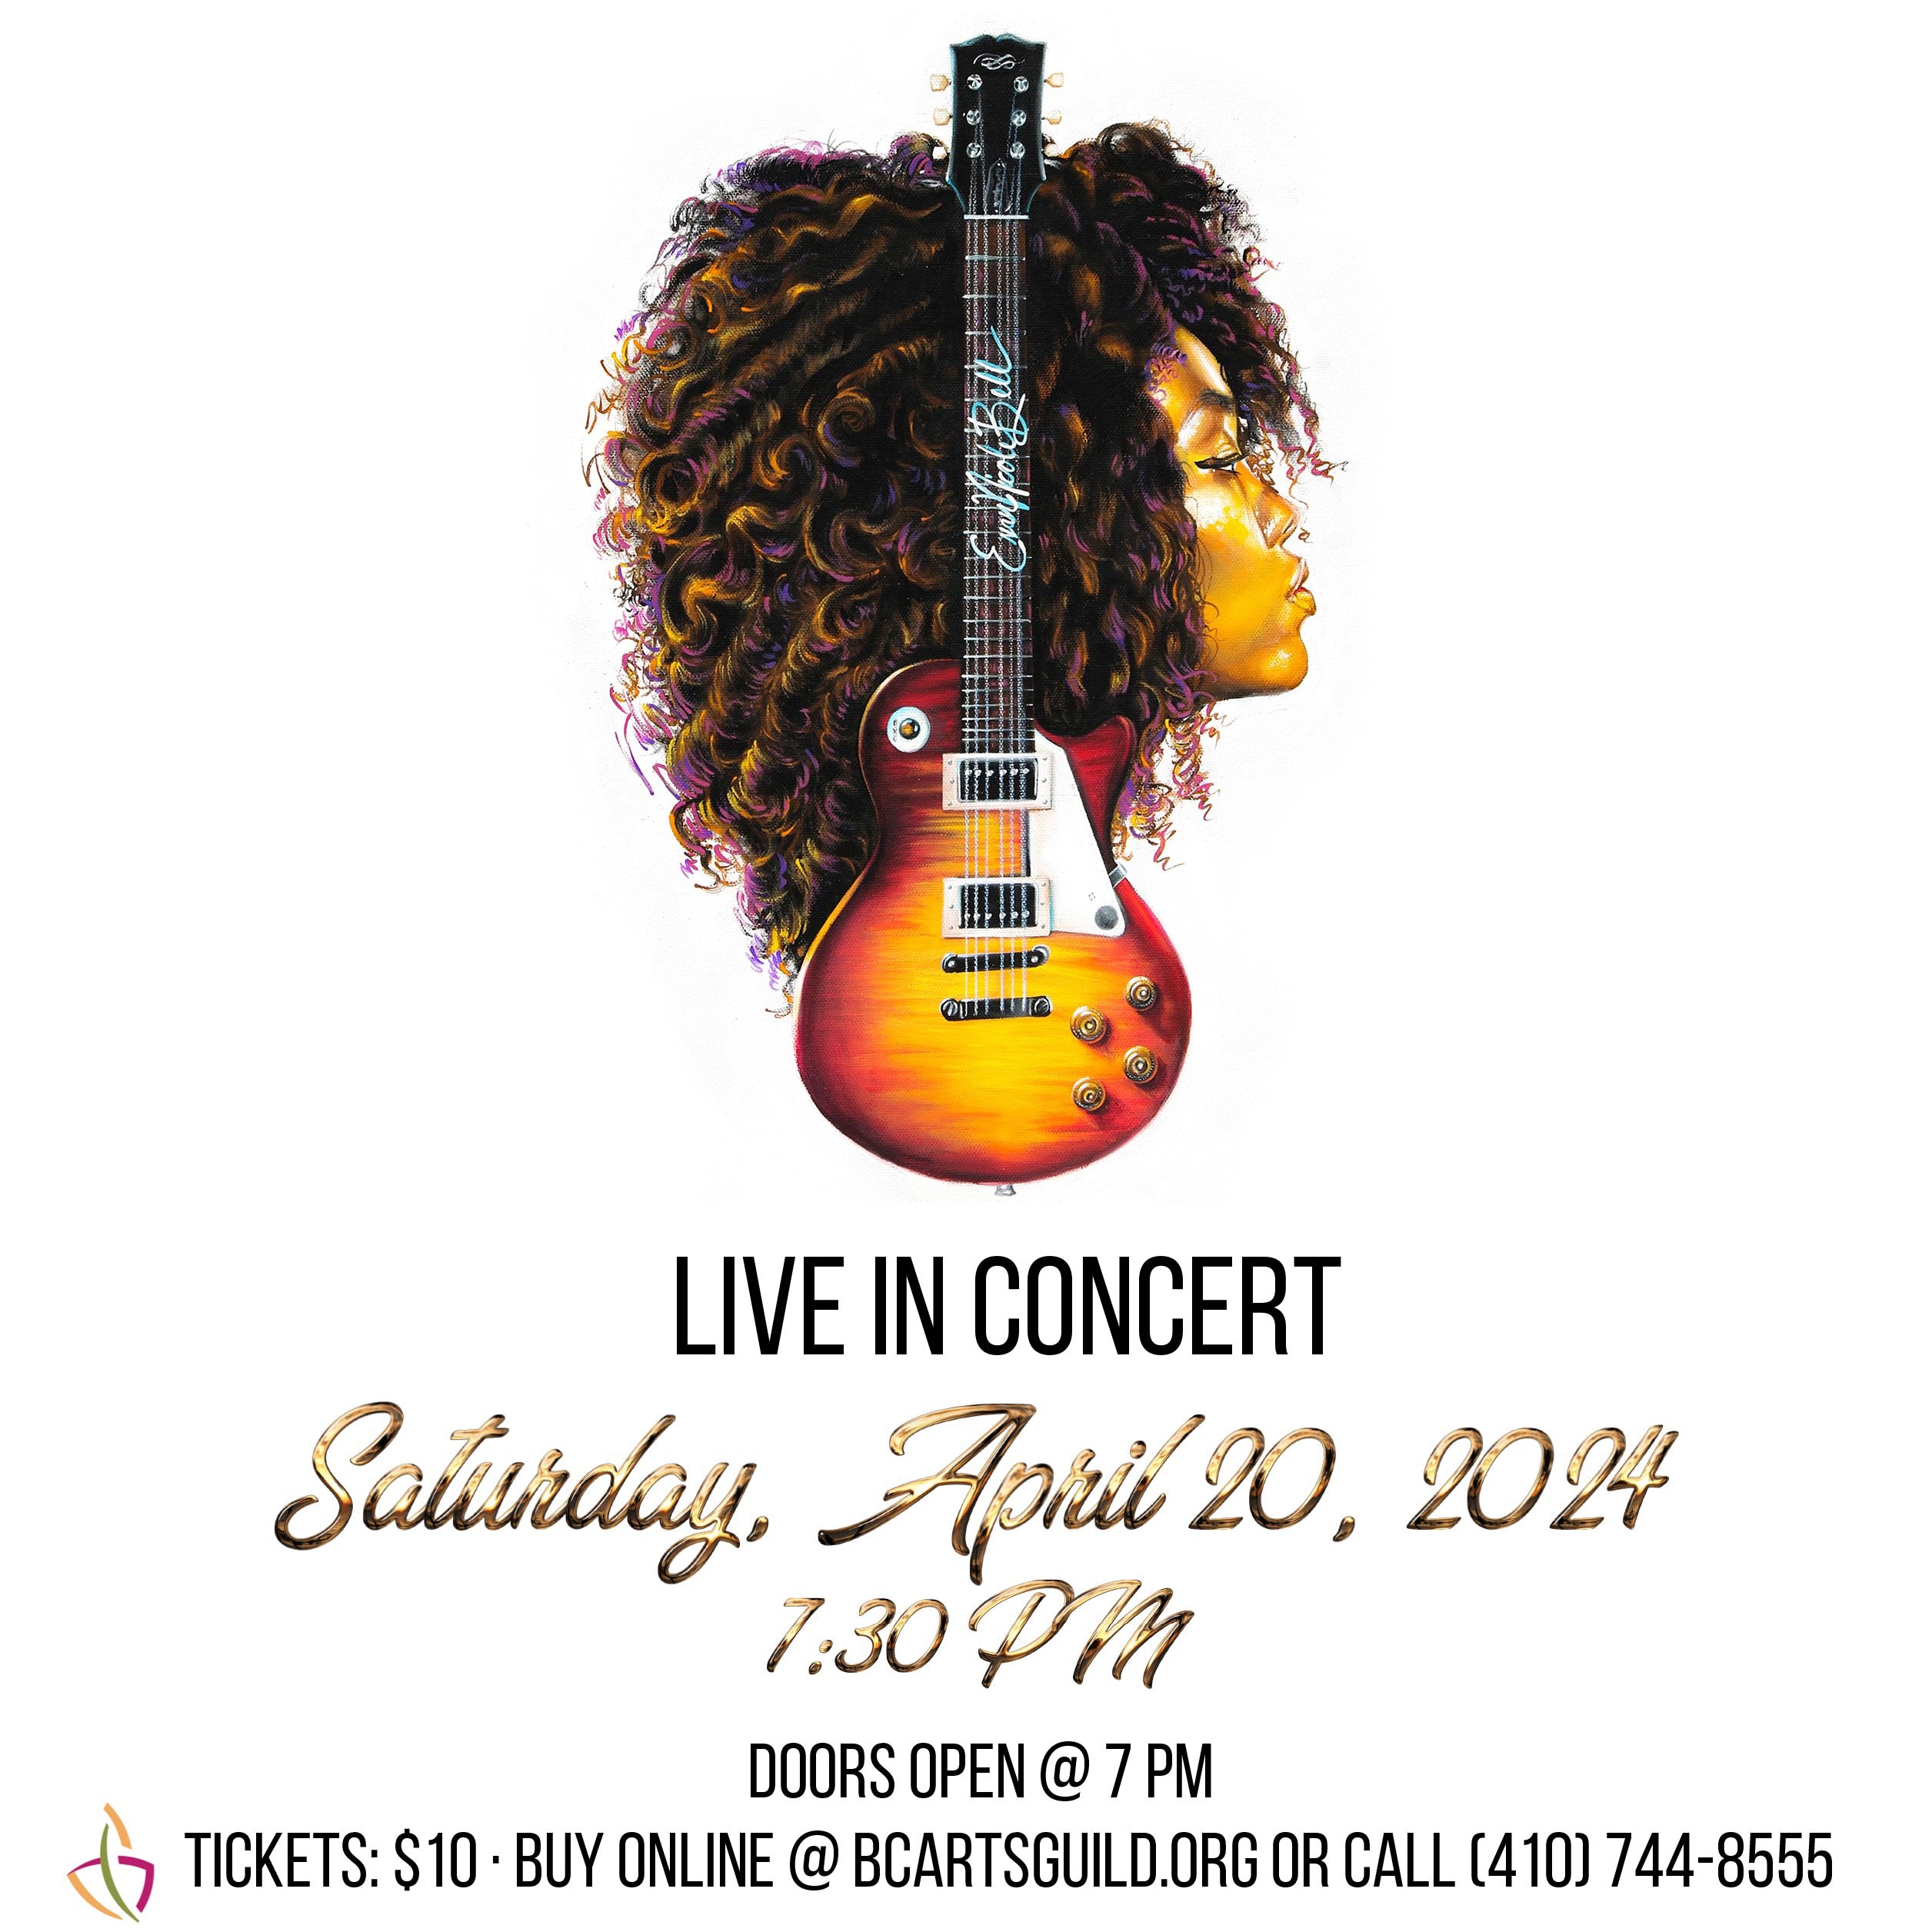 Evan Nicole Bell -- Live in Concert - Saturday April 20, 2024 - 7:30 PM - Doors open at 7 PM - Tickets $10 - Buy online @ bcartsguild.org or call (410) 744-8555